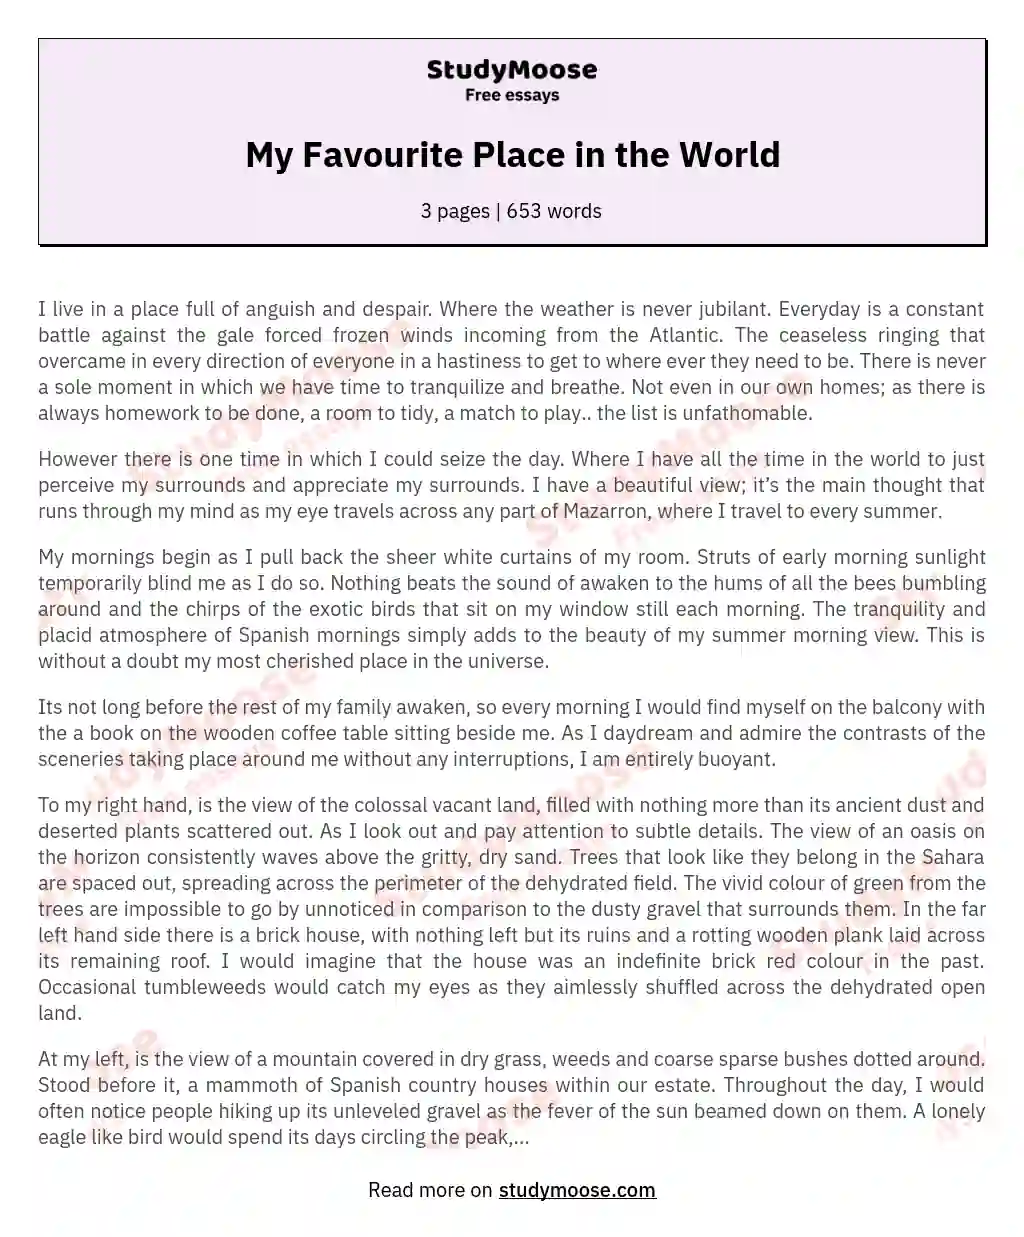 My Favourite Place in the World essay